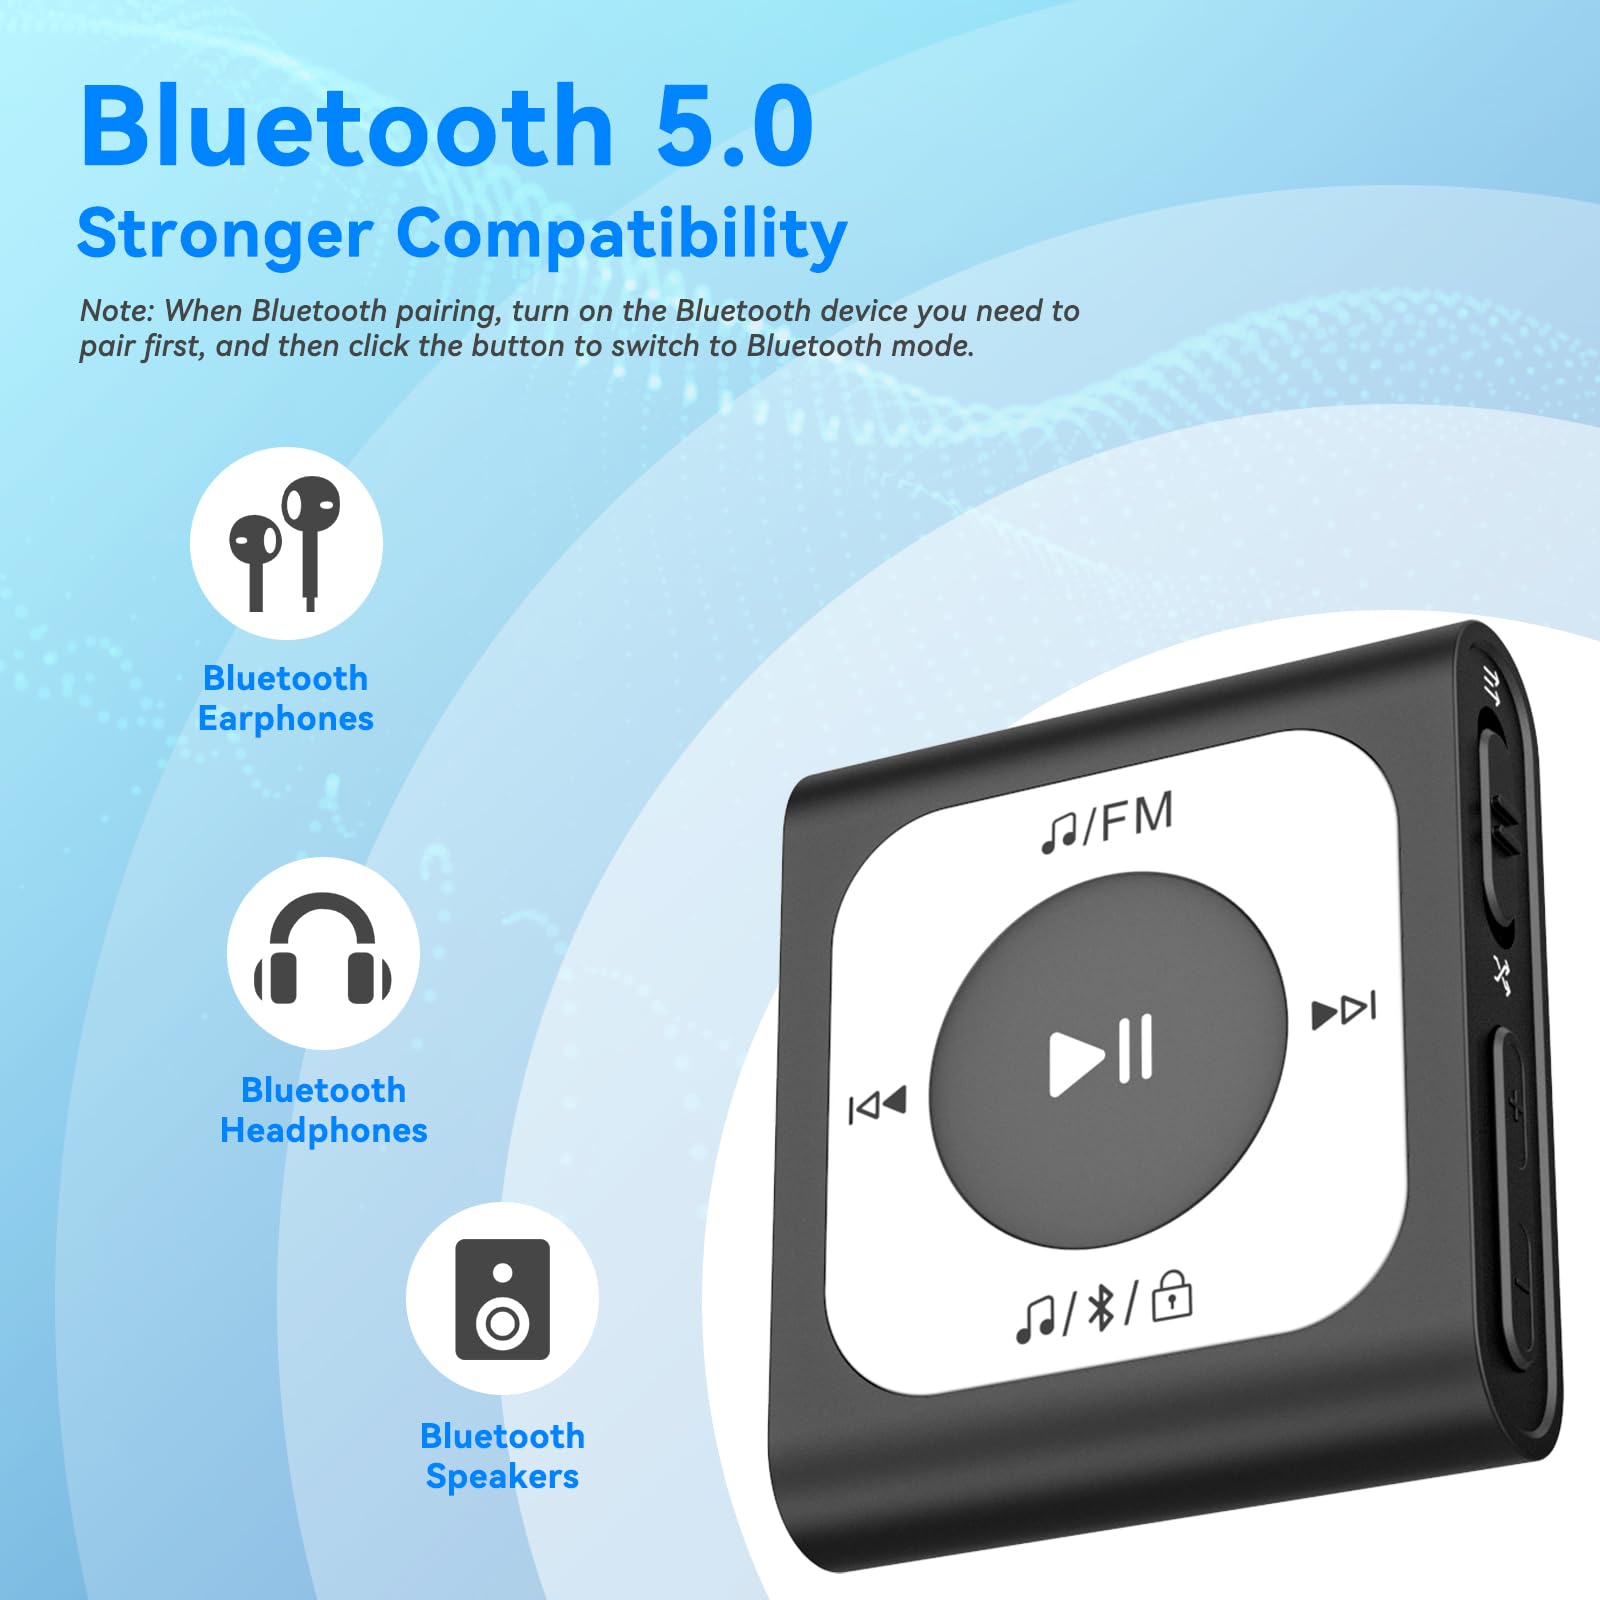 64GB Clip MP3 Player with Bluetooth, AGPTEK A51PL Portable Music Player with FM Radio, Shuffle, No Phone Needed, for Sports(Black)